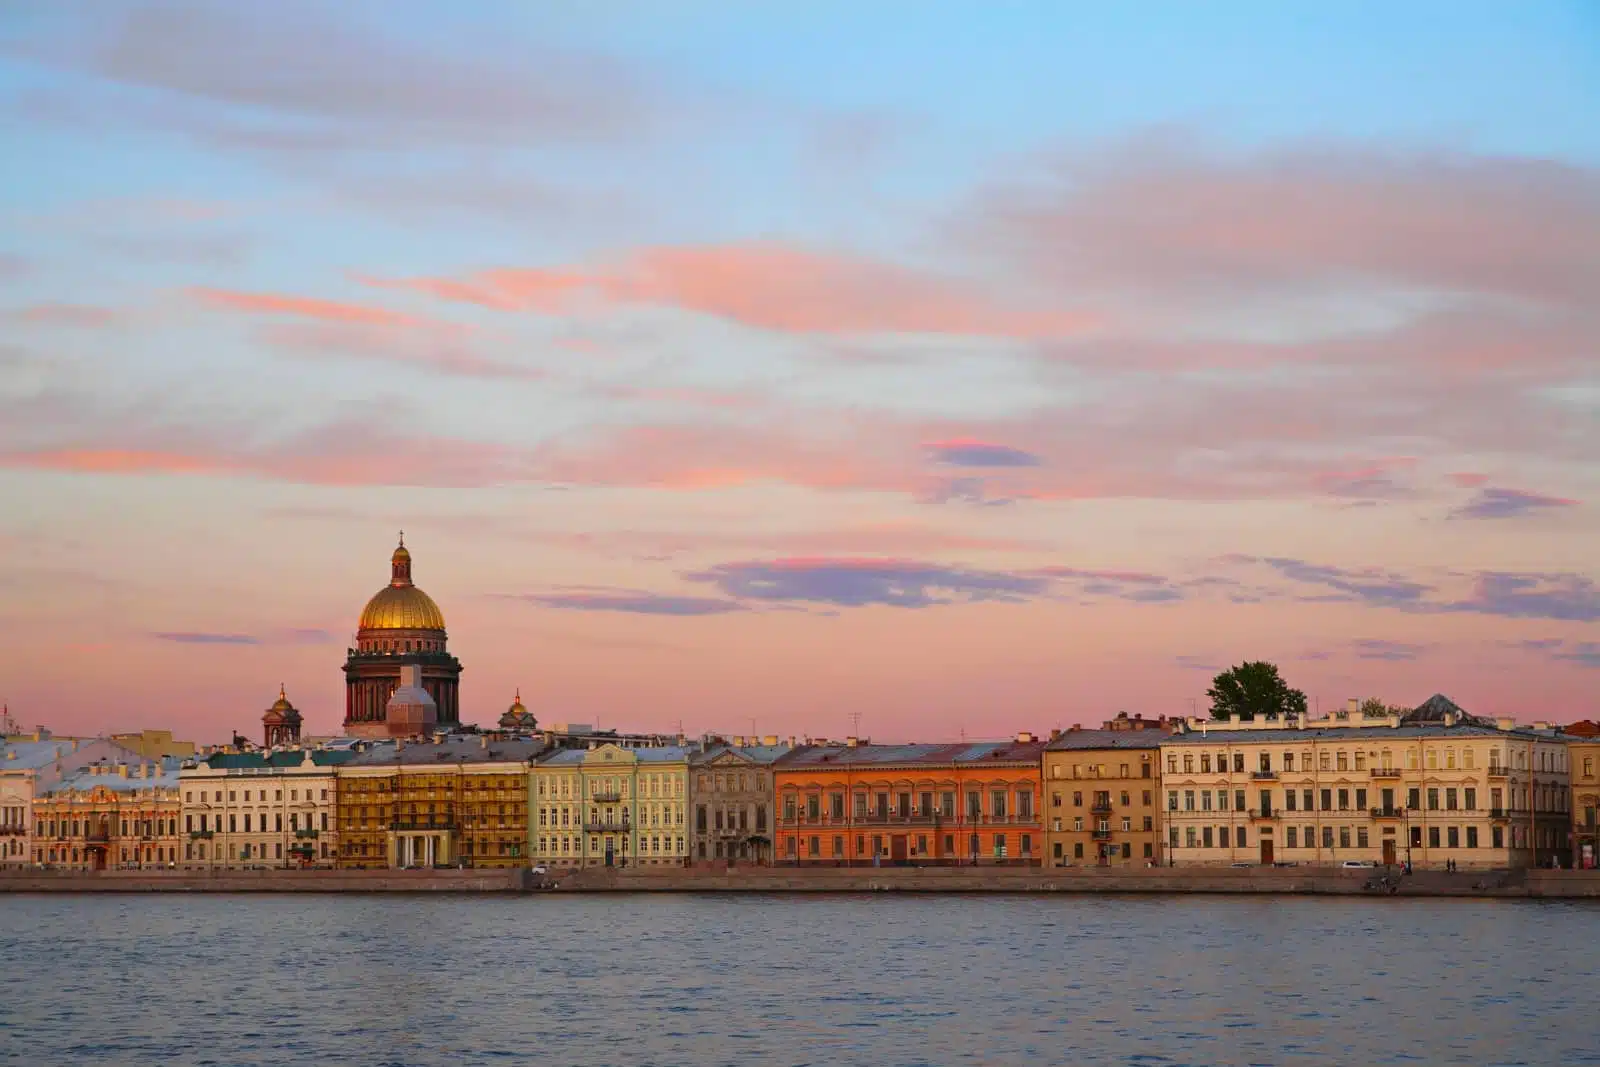 St. Petersburg. Neva Embankment St. Isaac’s Cathedral against the evening sky